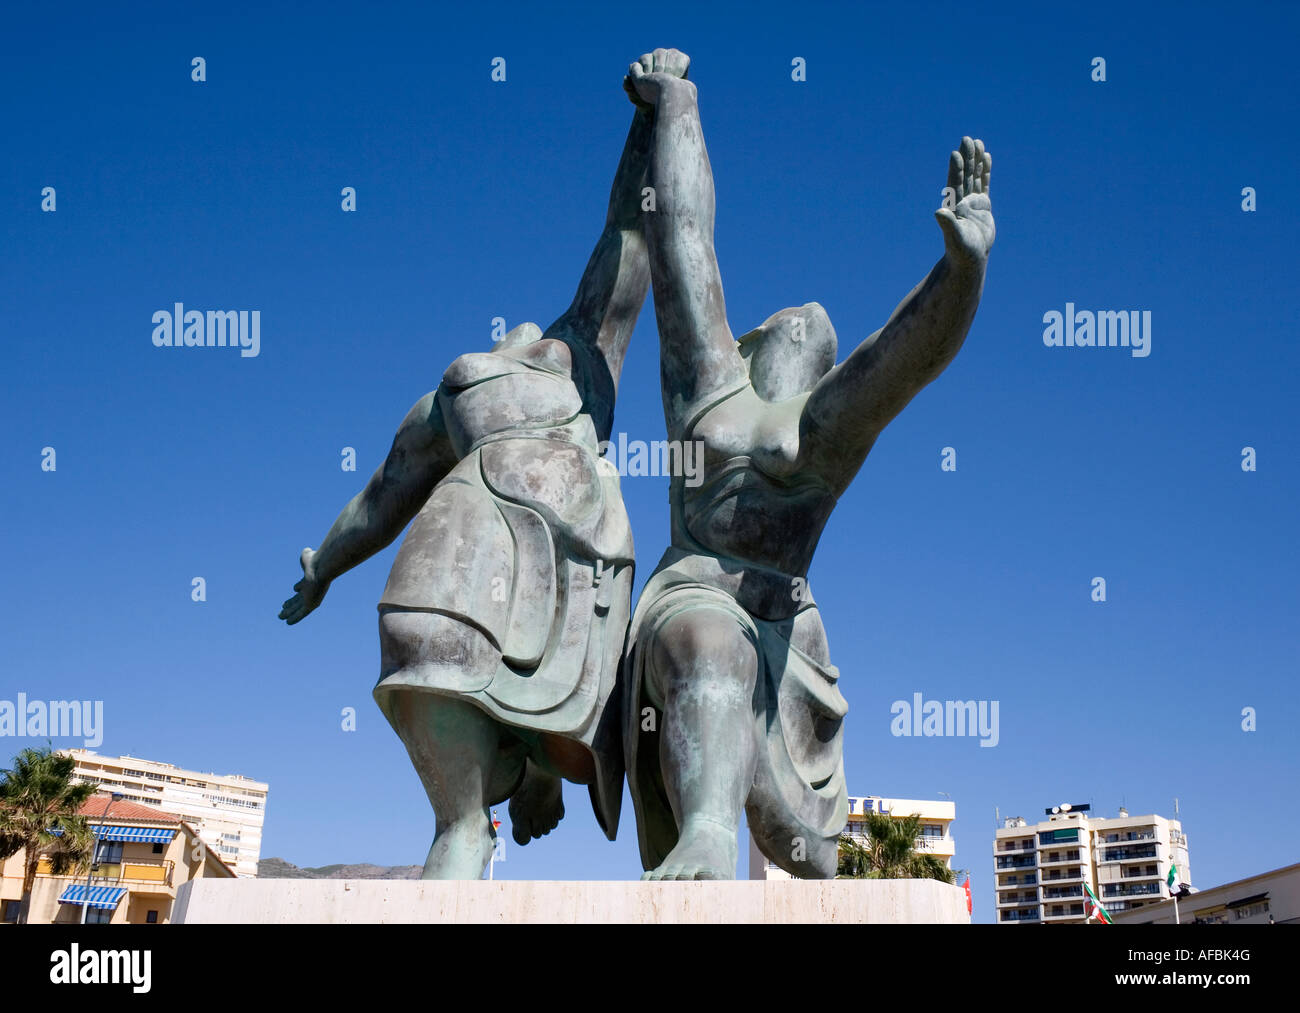 Torremolinos Costa del Sol Malaga Province Spain Statue from painting by Pablo Picasso entitled Two Women Running on the Beach Stock Photo